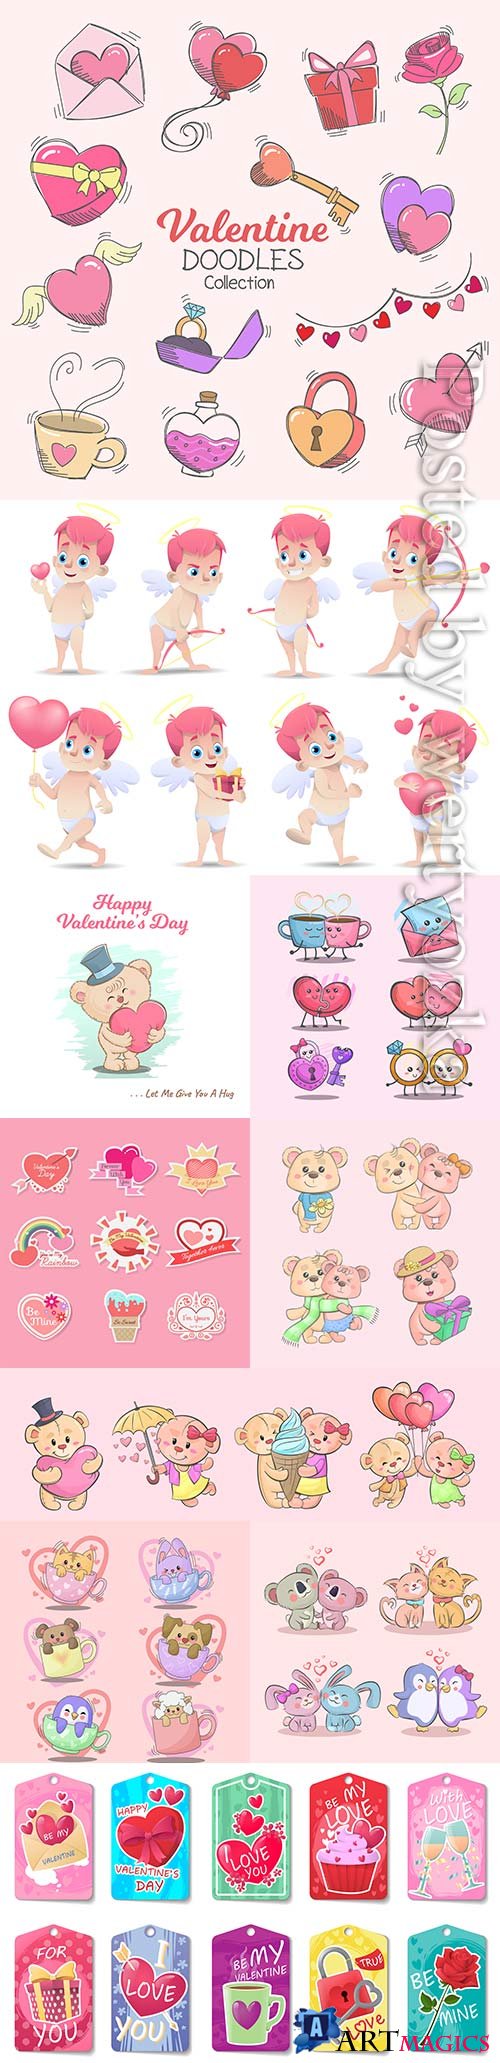 Happy valentine's day doodle icons and elements collection